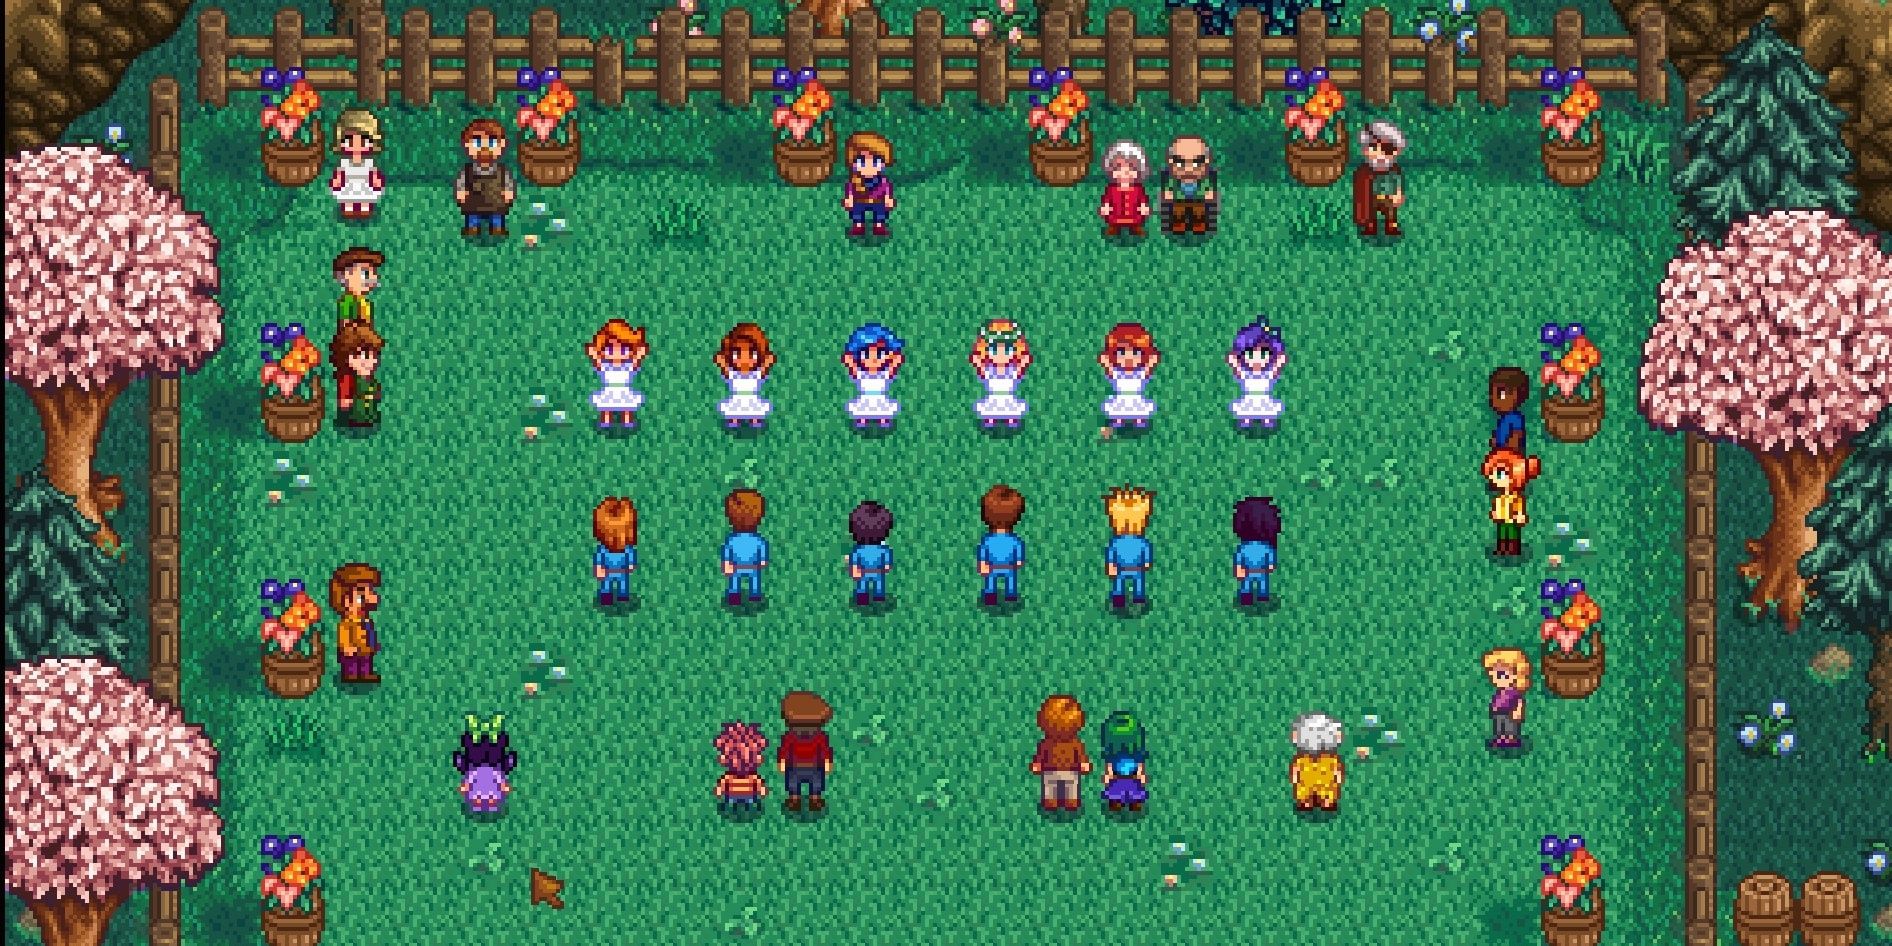 The Flower Dance being performed in Stardew Valley